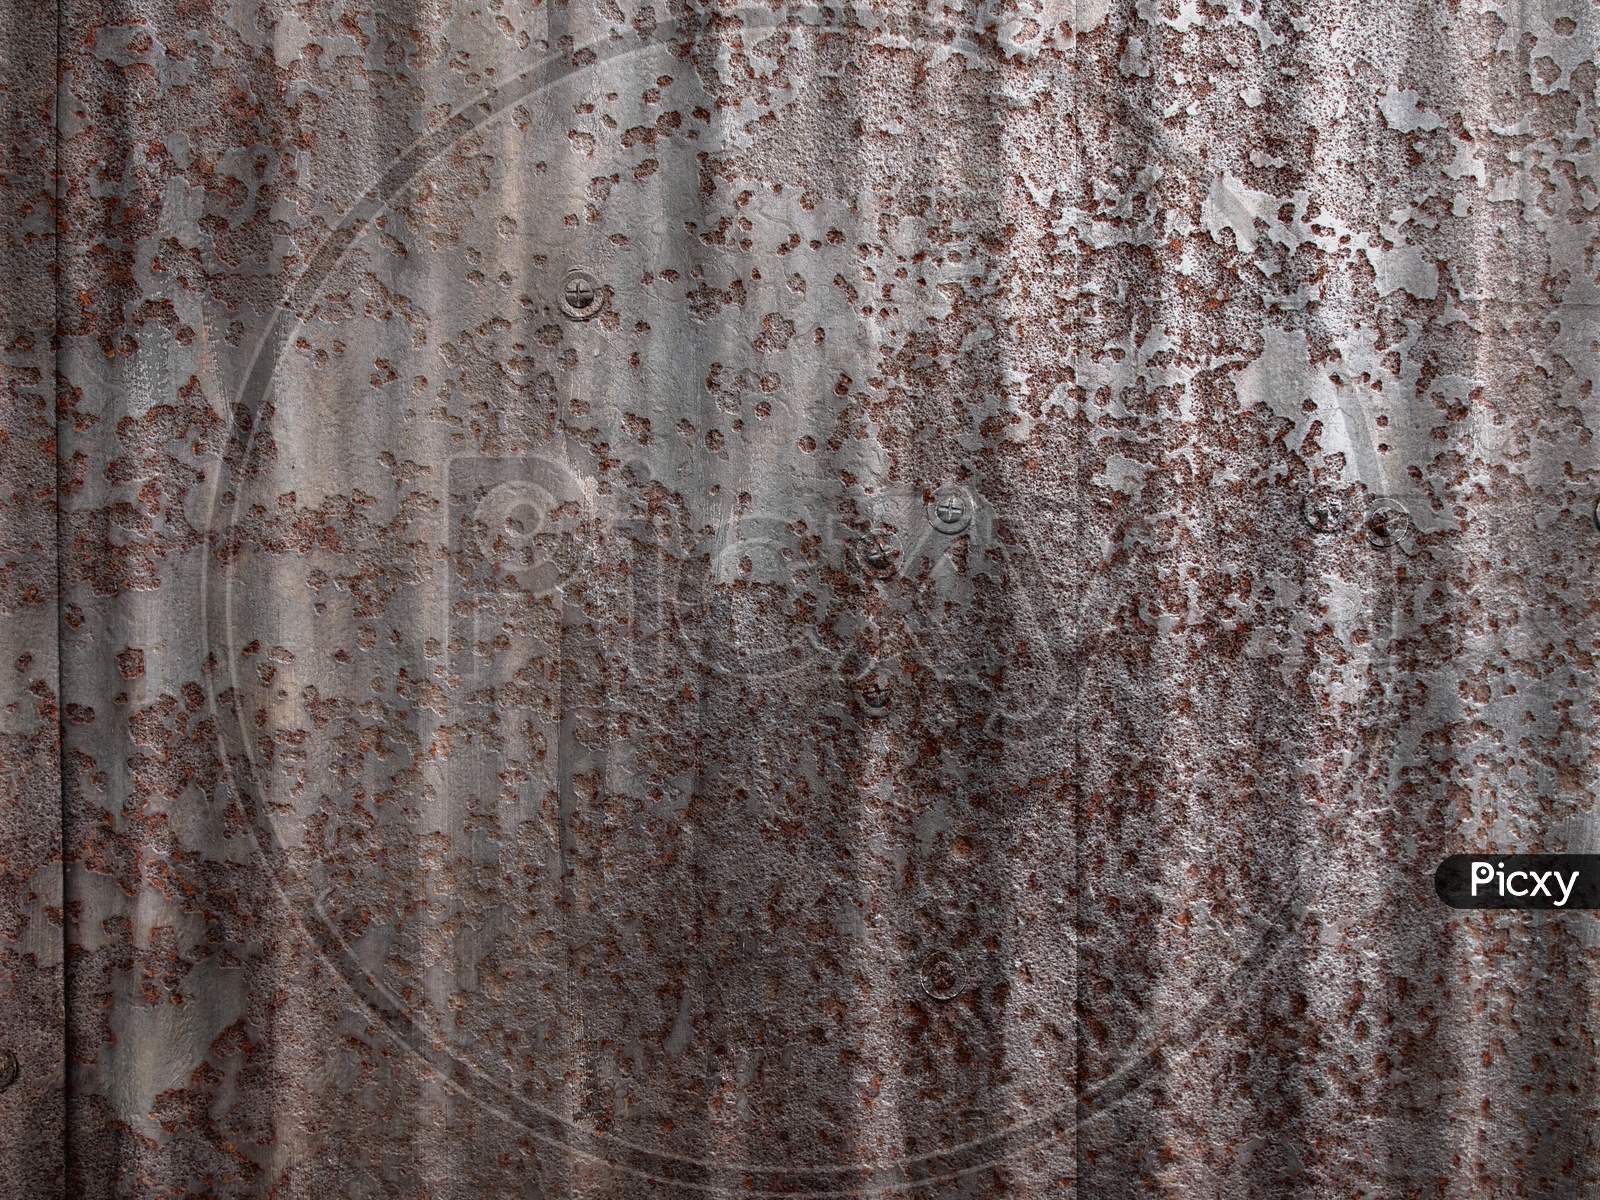 Rusted Metal Texture Background